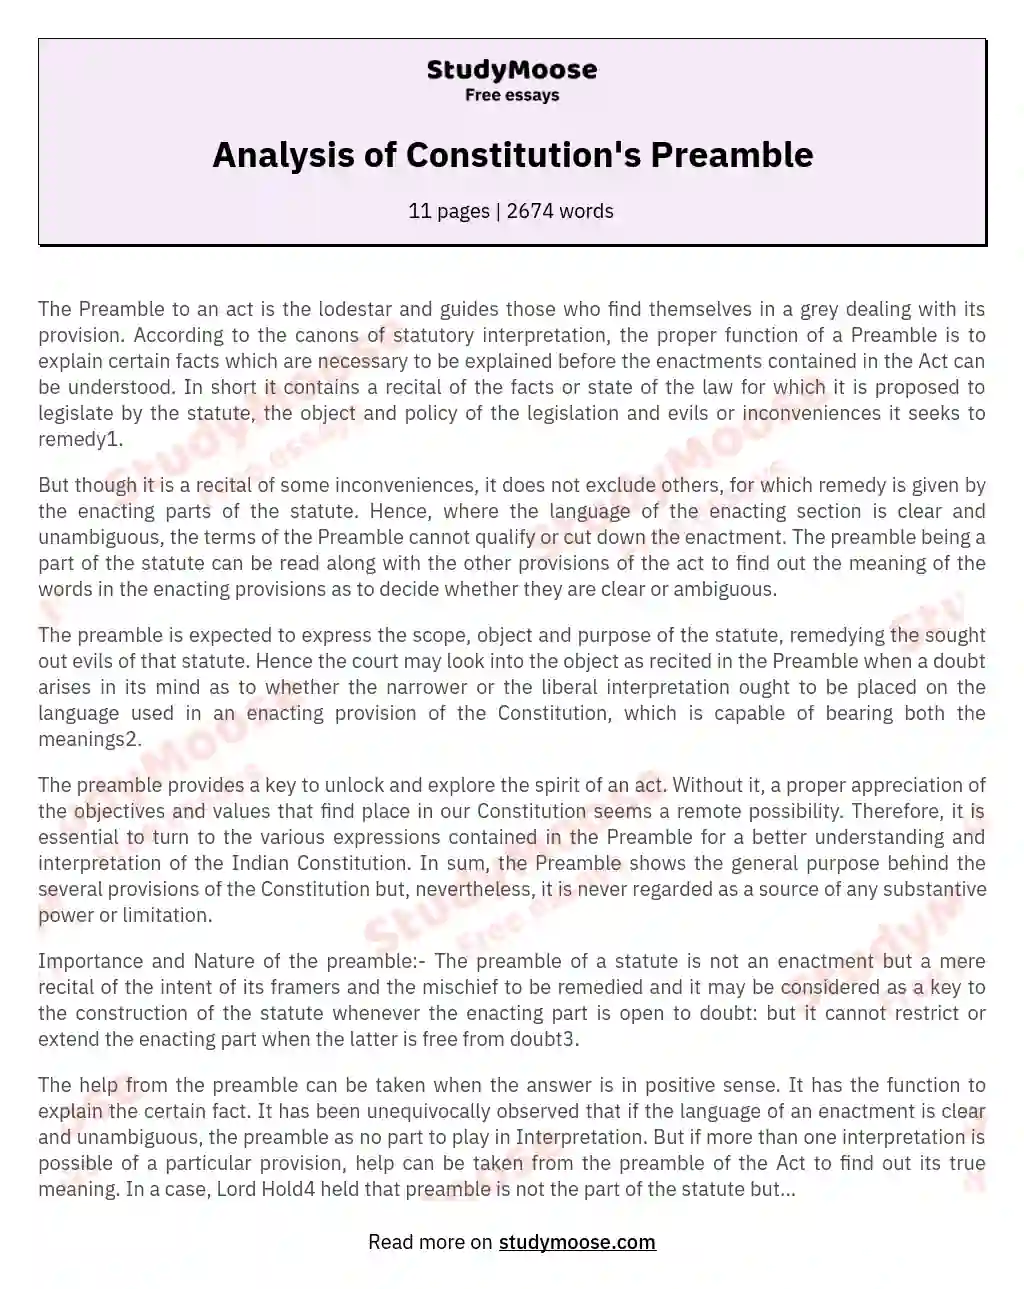 Analysis of Constitution's Preamble essay